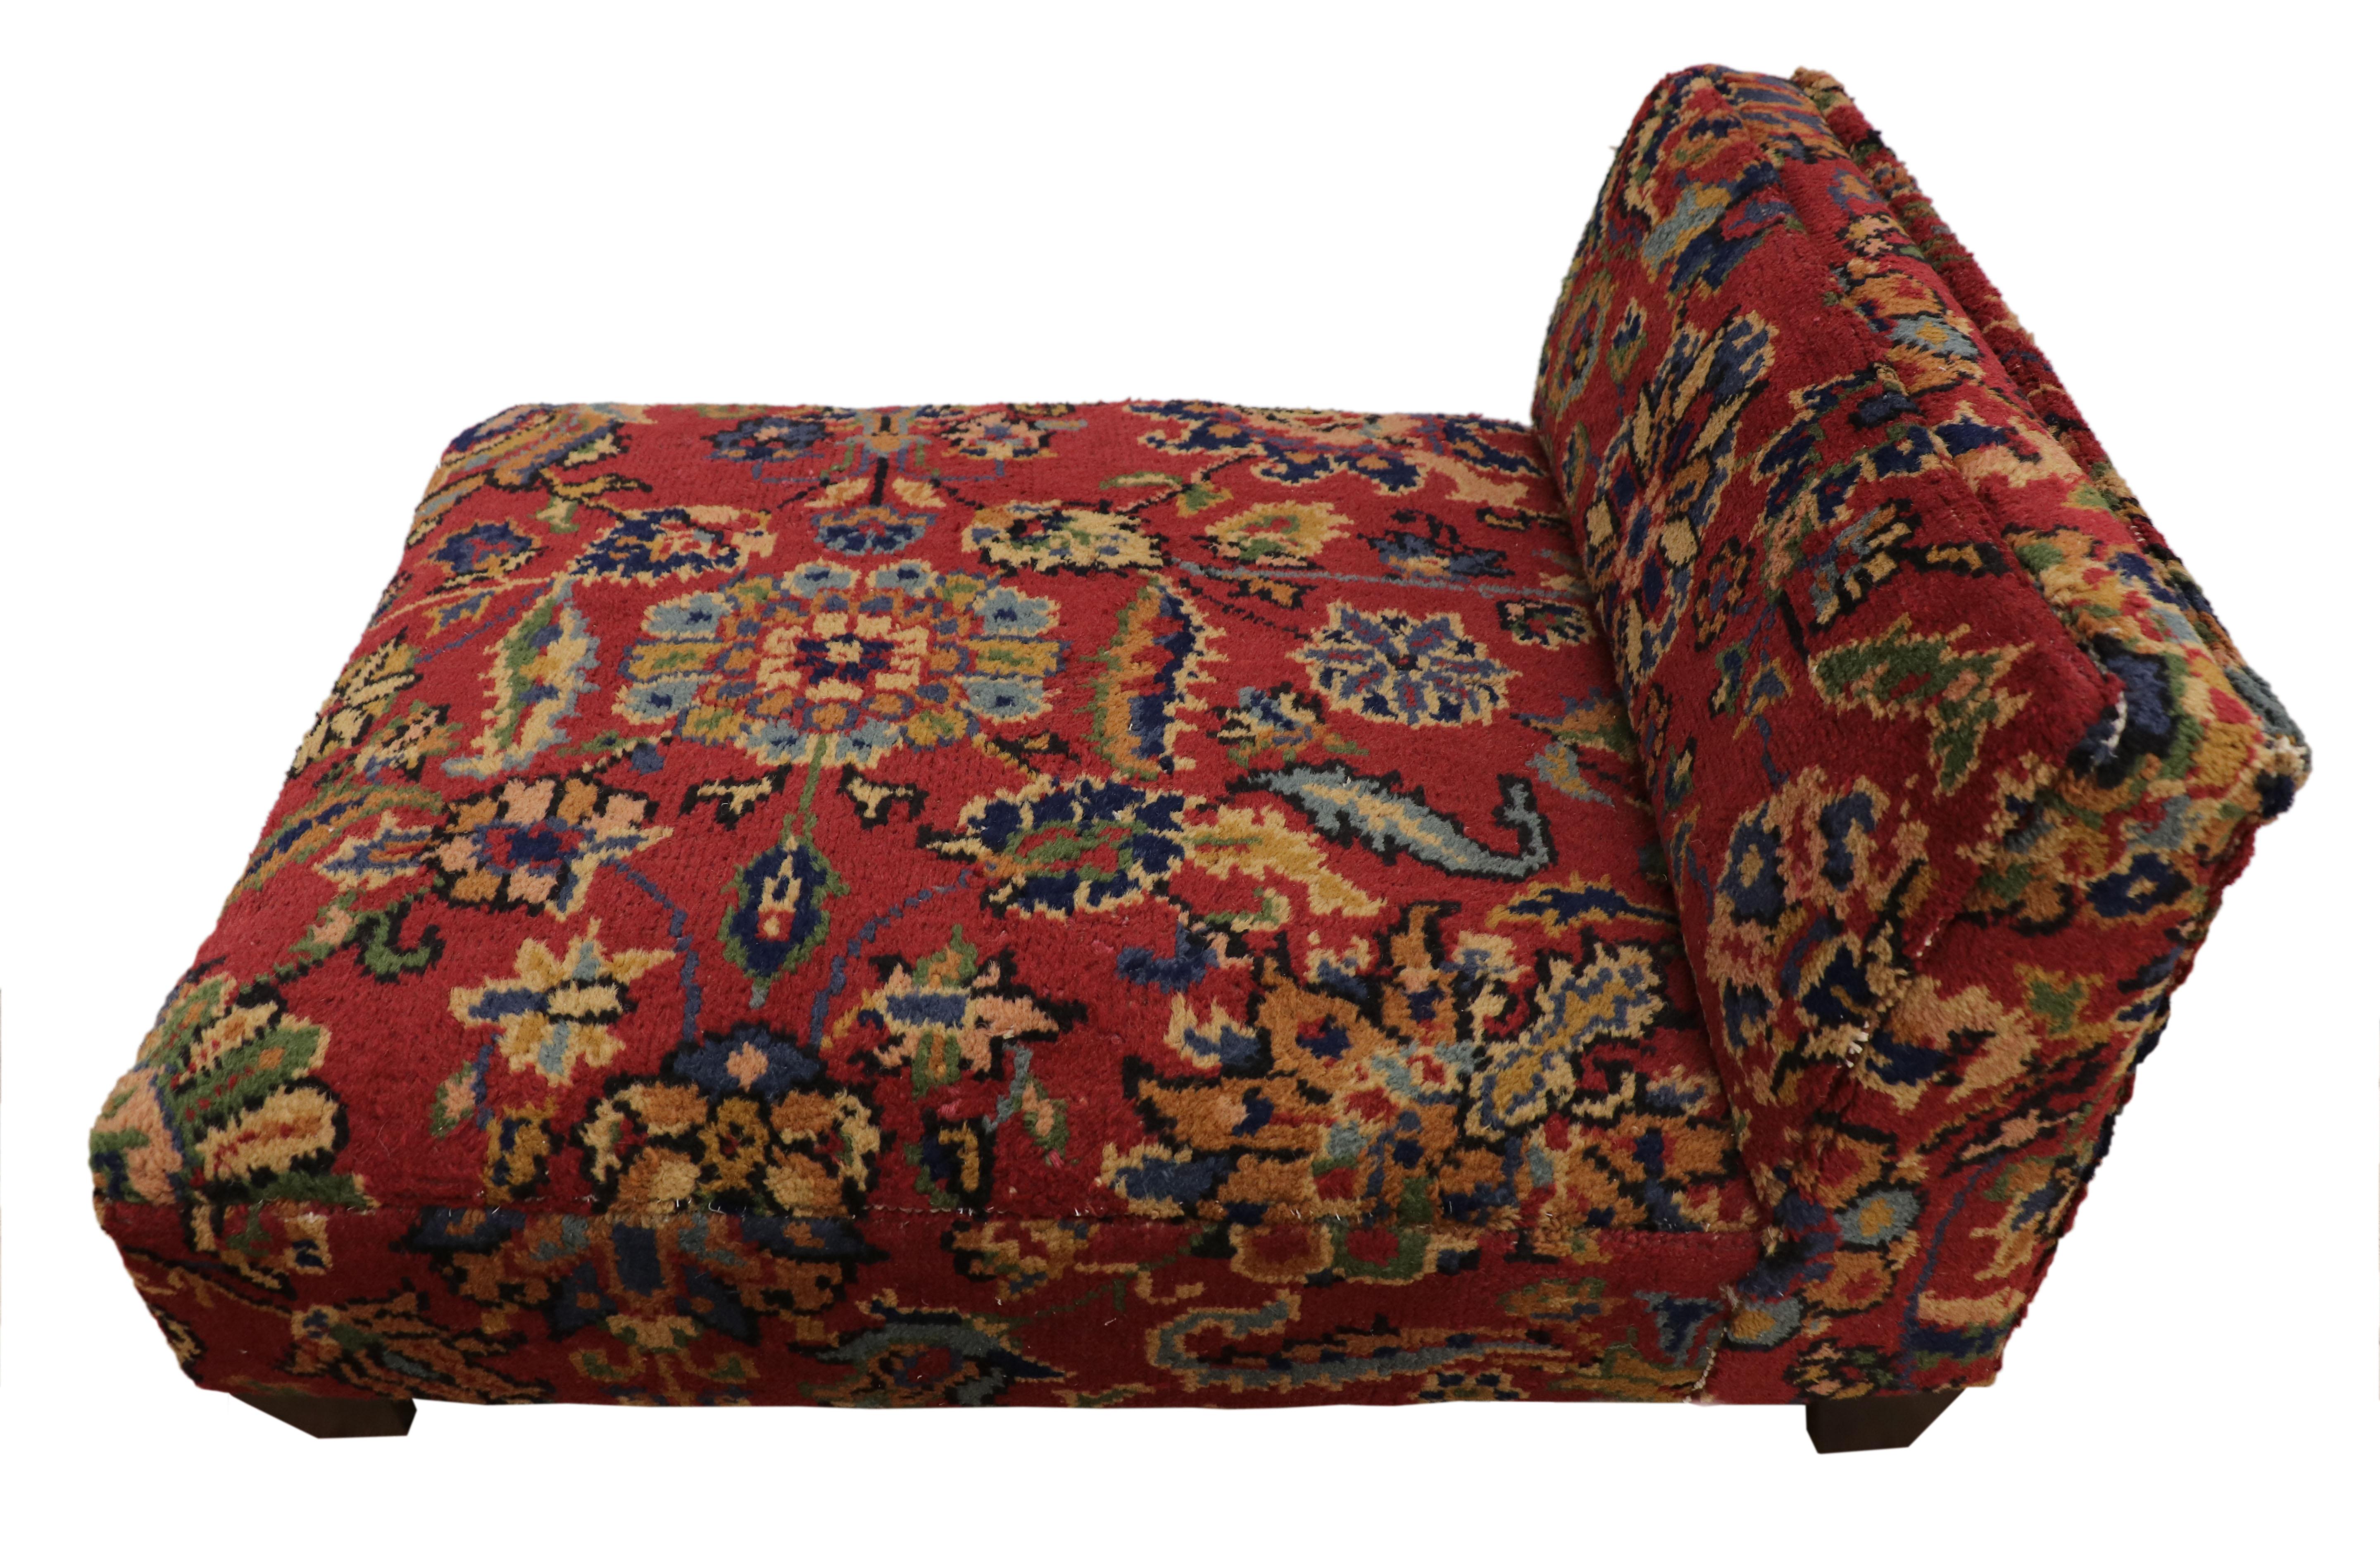 Low profile upholstered slipper chair from antique Persian rug or luxury petbed. This hand knotted wool late 19th century antique Persian Khorassan rug was converted into low profile slipper chair or perhaps it can be used as a luxury dog bed. It is